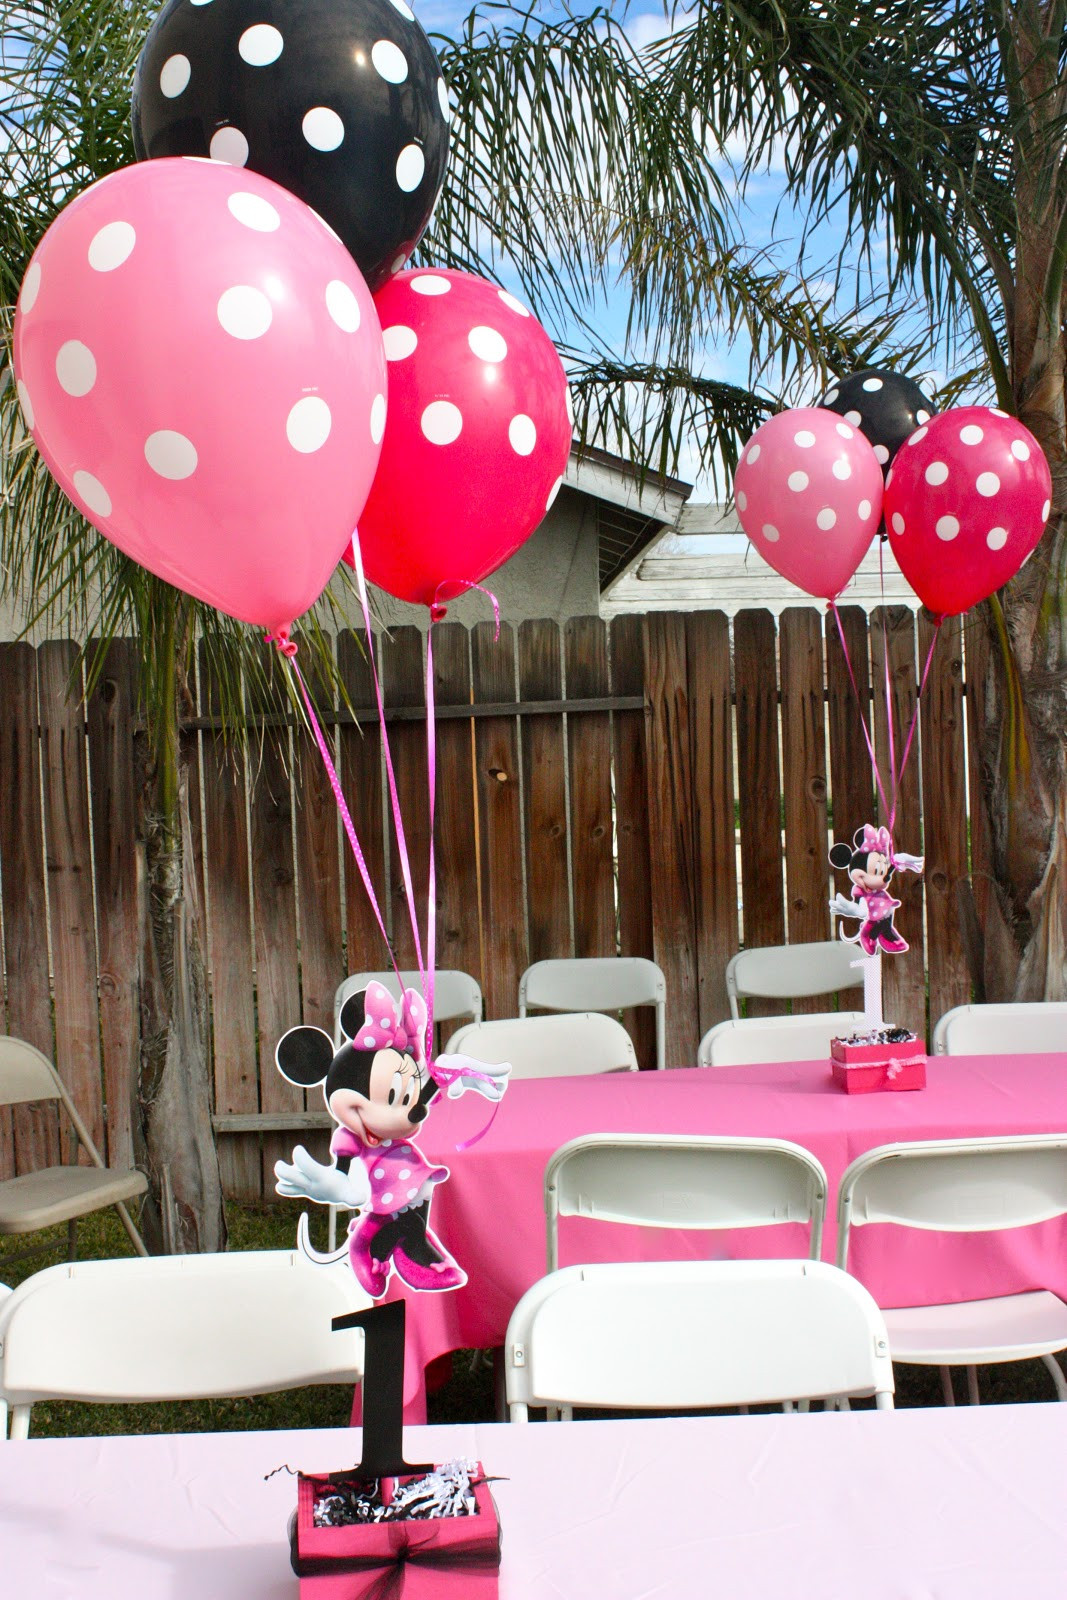 Red Minnie Mouse Birthday Decorations
 tini Sophia s 1st Birthday Minnie Mouse Party